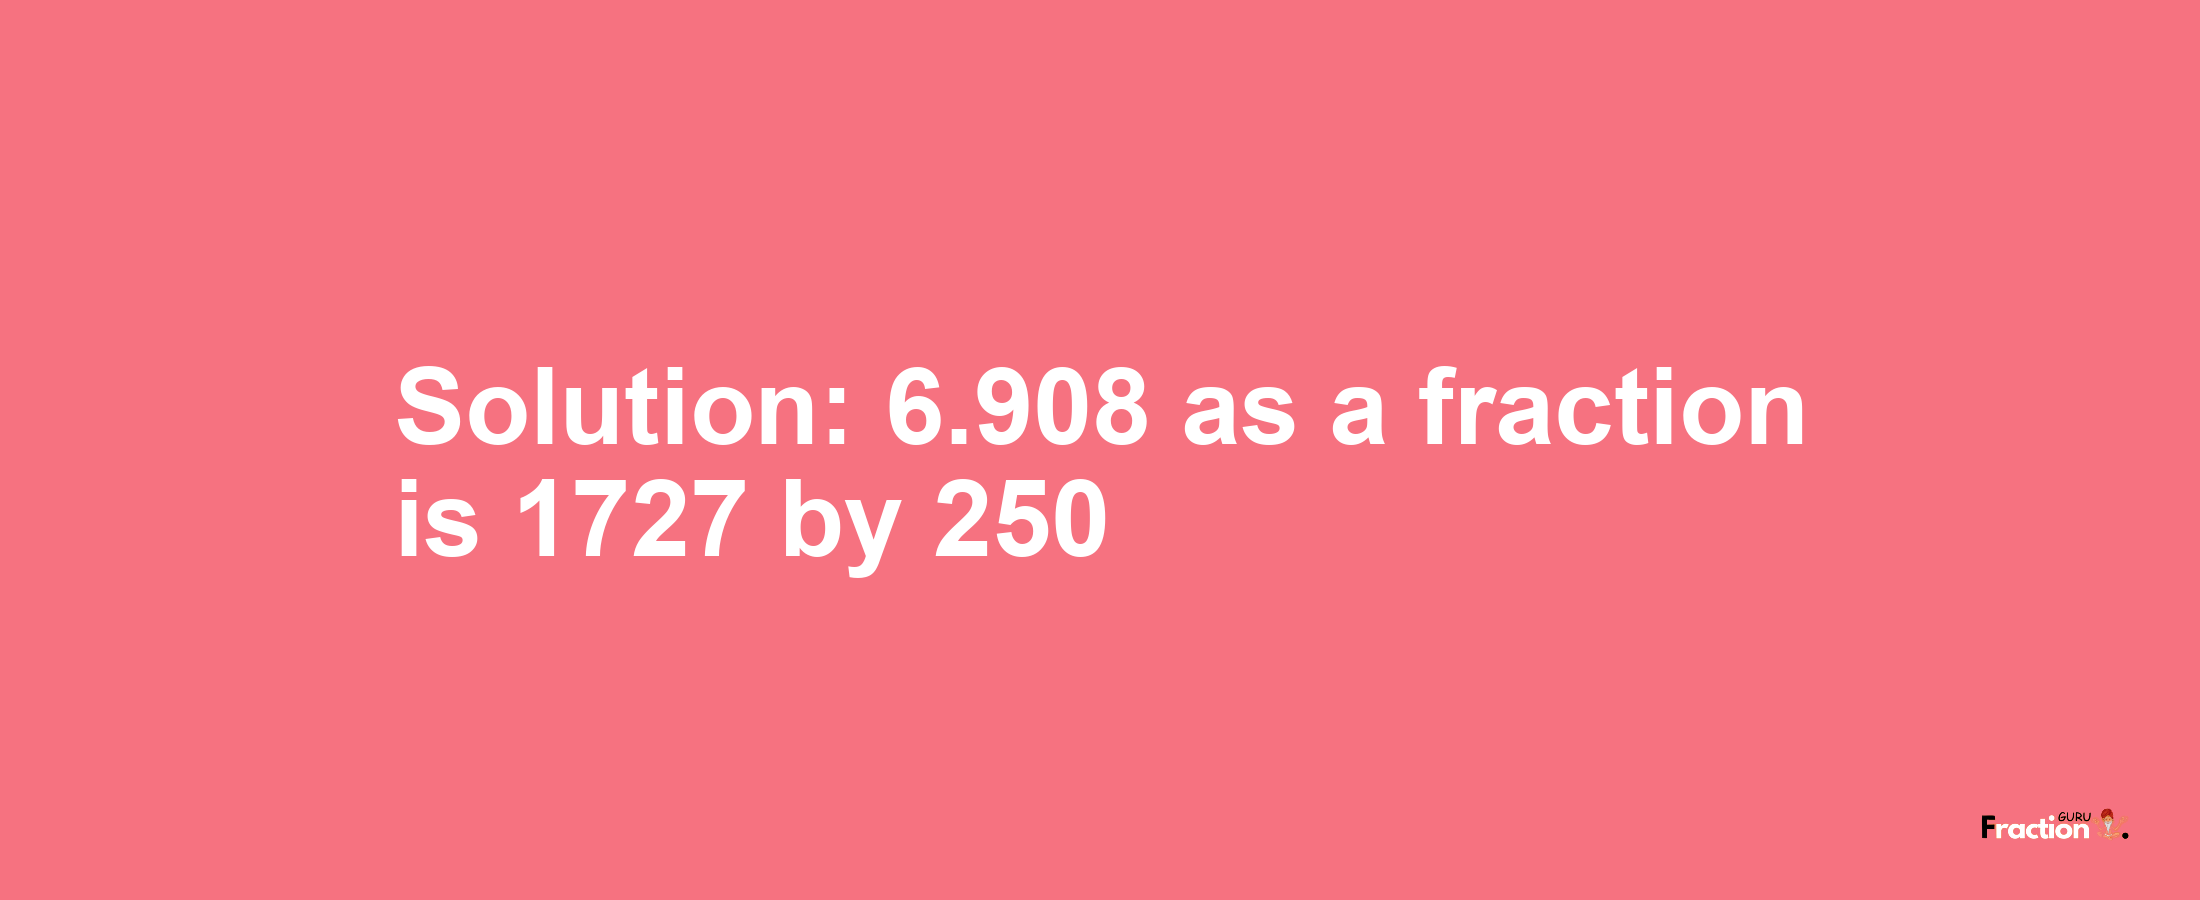 Solution:6.908 as a fraction is 1727/250